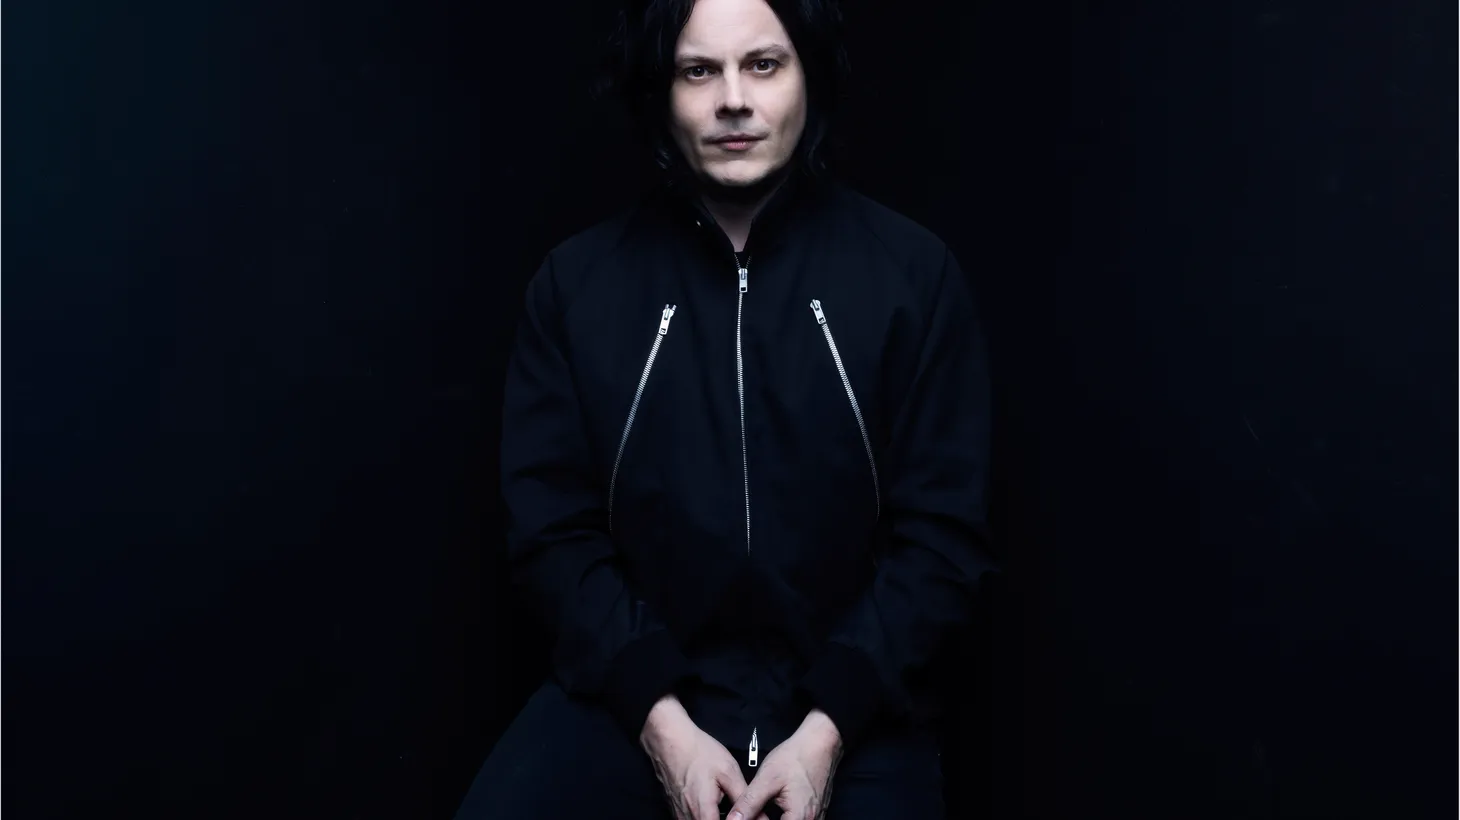 We air a live session with Jack White at 10am to celebrate the release of his new album Boarding House Reach. This will be one of his first live radio sessions behind this album and one of his first live performances in 4 years.